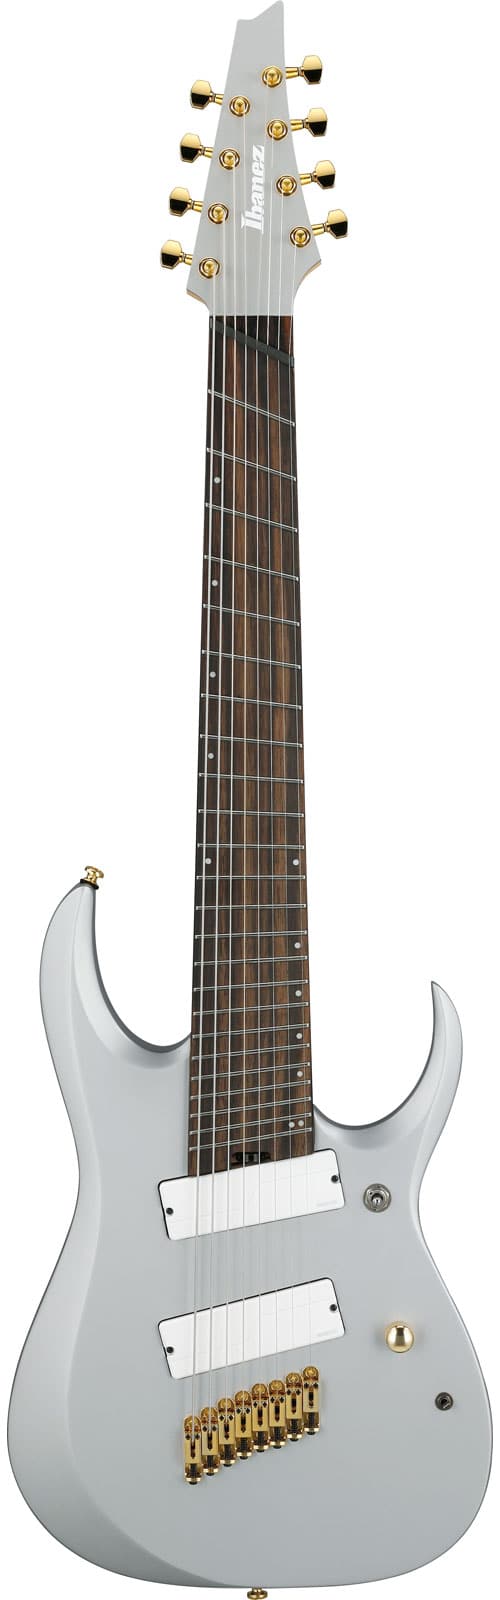 IBANEZ RGDMS8 CLASSIC SILVER MATTE